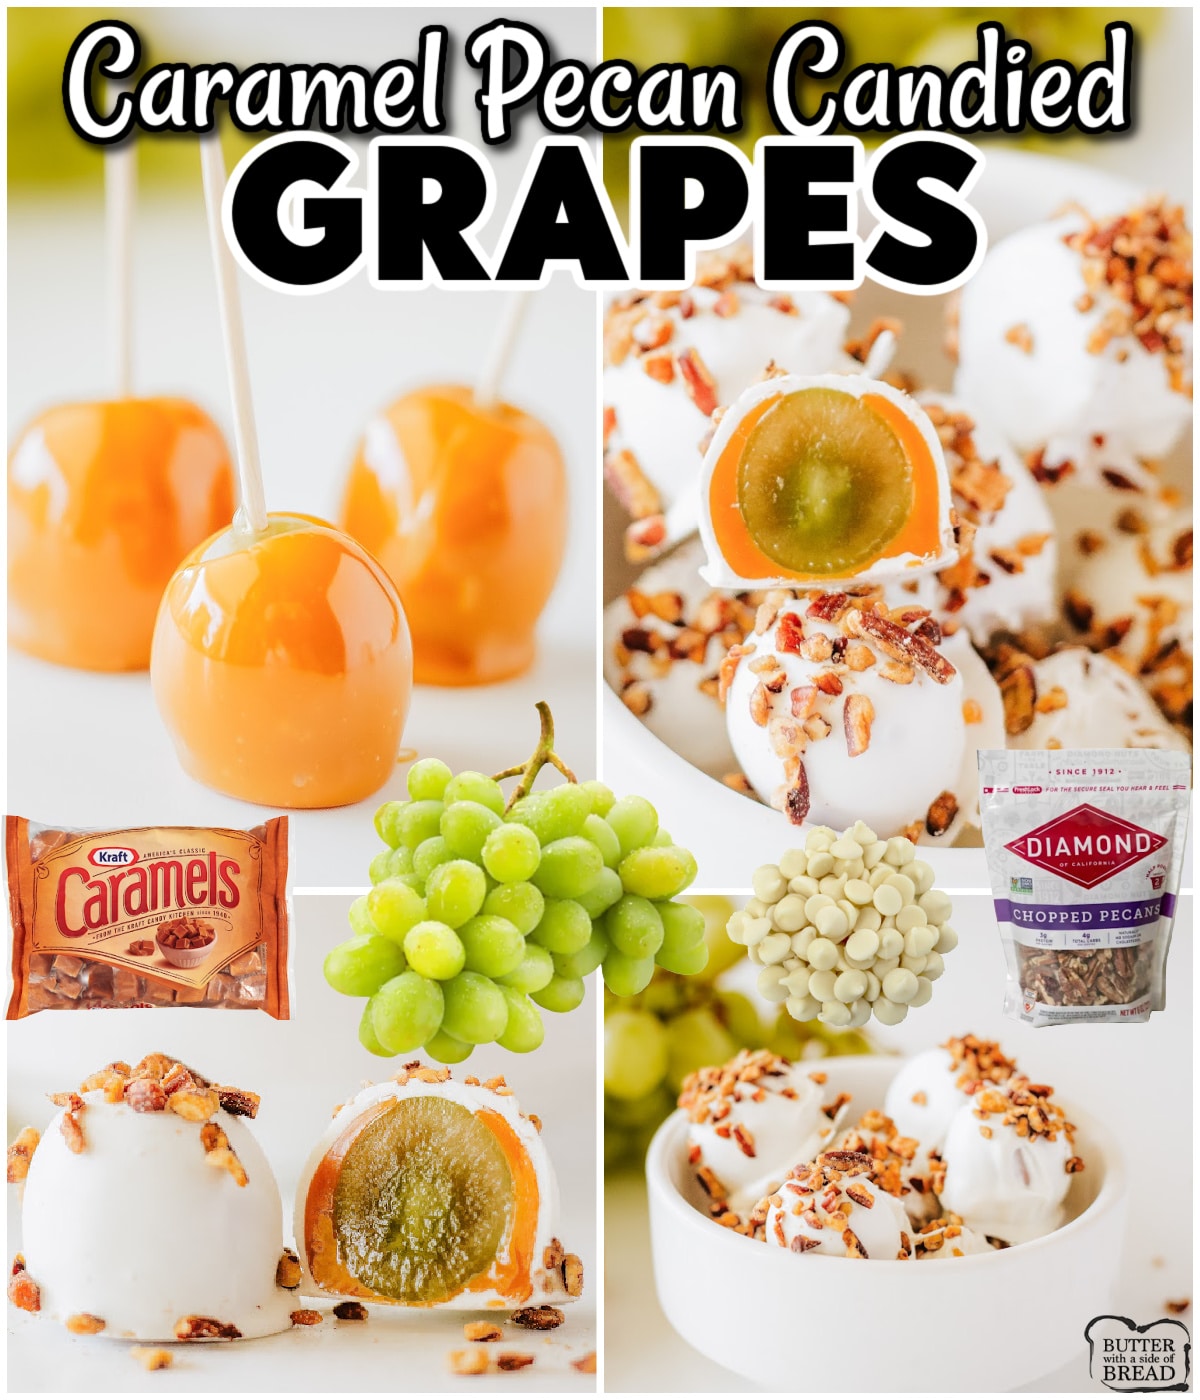 Caramel Grapes are fresh grapes dipped in melted caramel & white chocolate, then covered with pecans! Simple, decadent & utterly delicious!